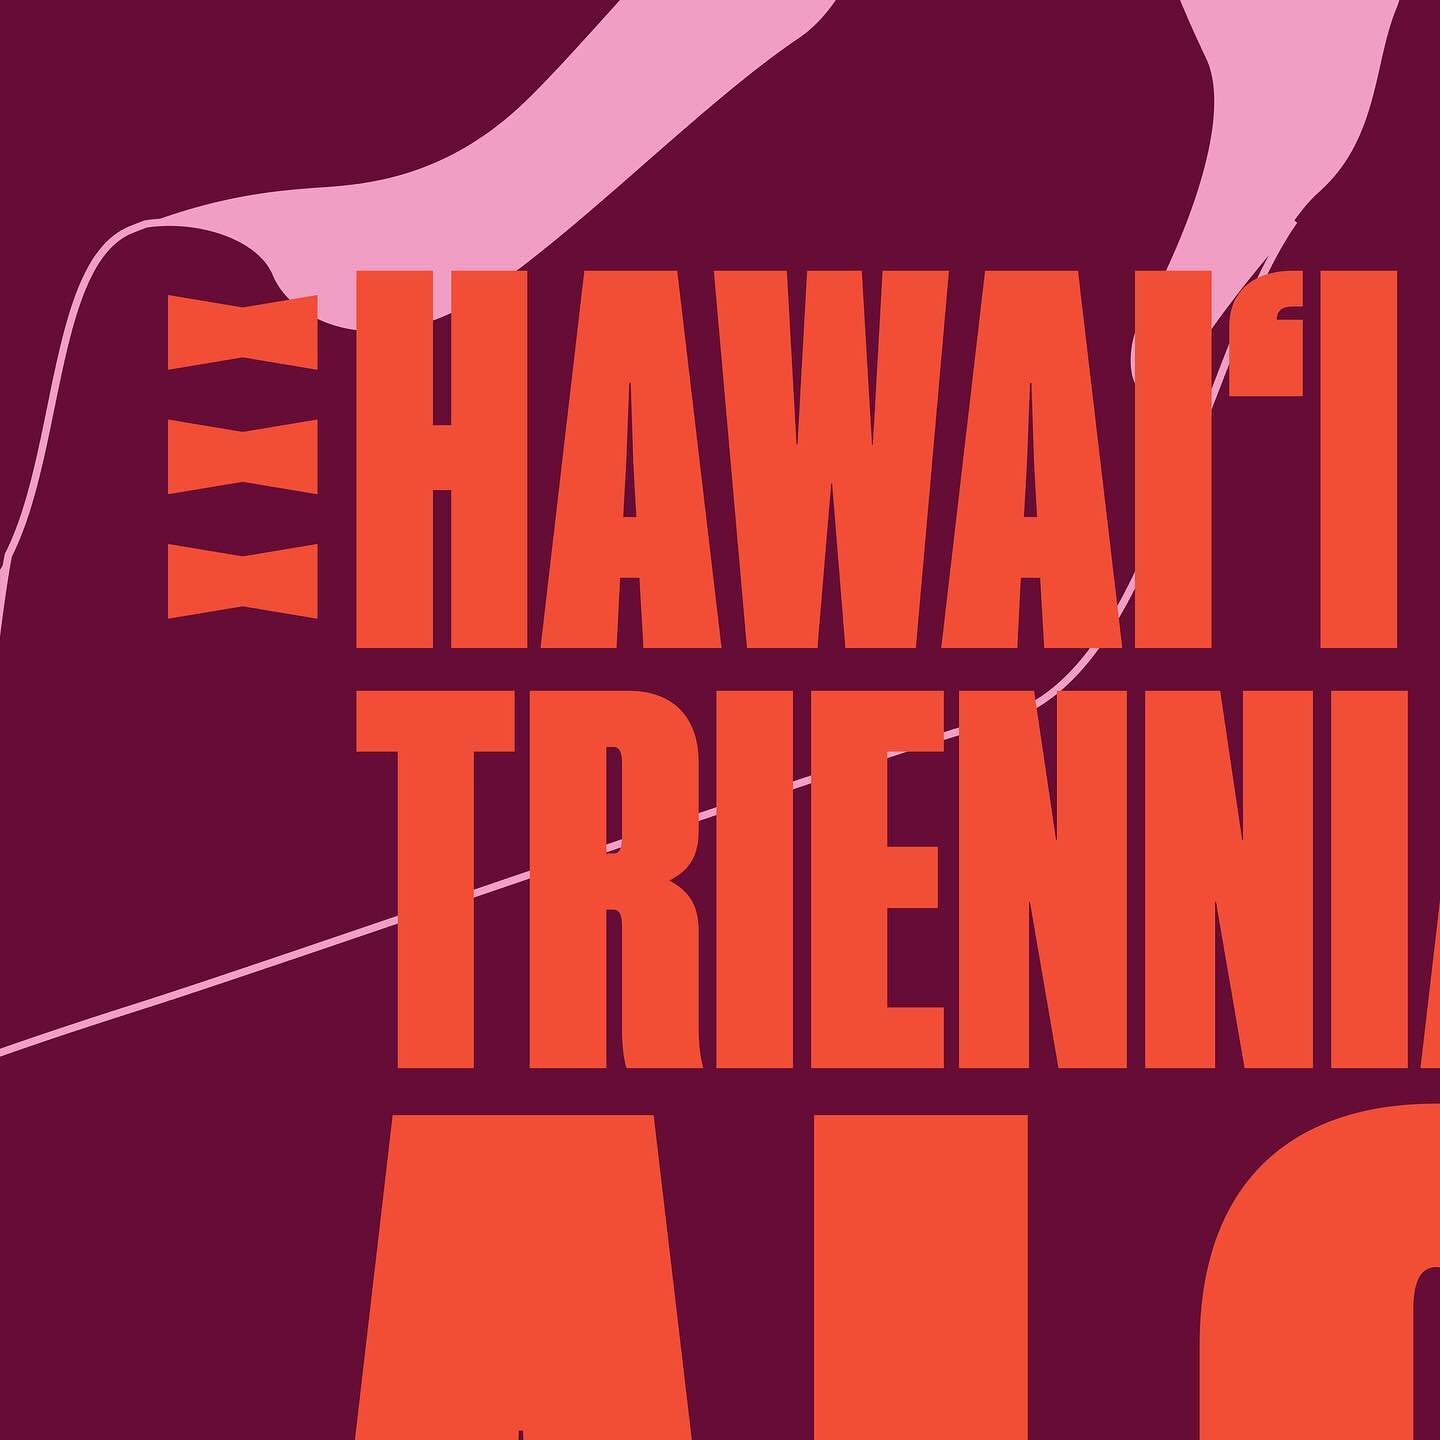 ALOHA NŌ
Hawai&lsquo;i Triennial 2025 (HT25)
The state&rsquo;s largest, thematic exhibition of contemporary art from Hawai&lsquo;i, the Pacific, and beyond.
🗓️ 15 Feb &ndash; 04 May 2025
📍 O&lsquo;ahu | Maui | Hawai&lsquo;i Island
✨Organized by Haw